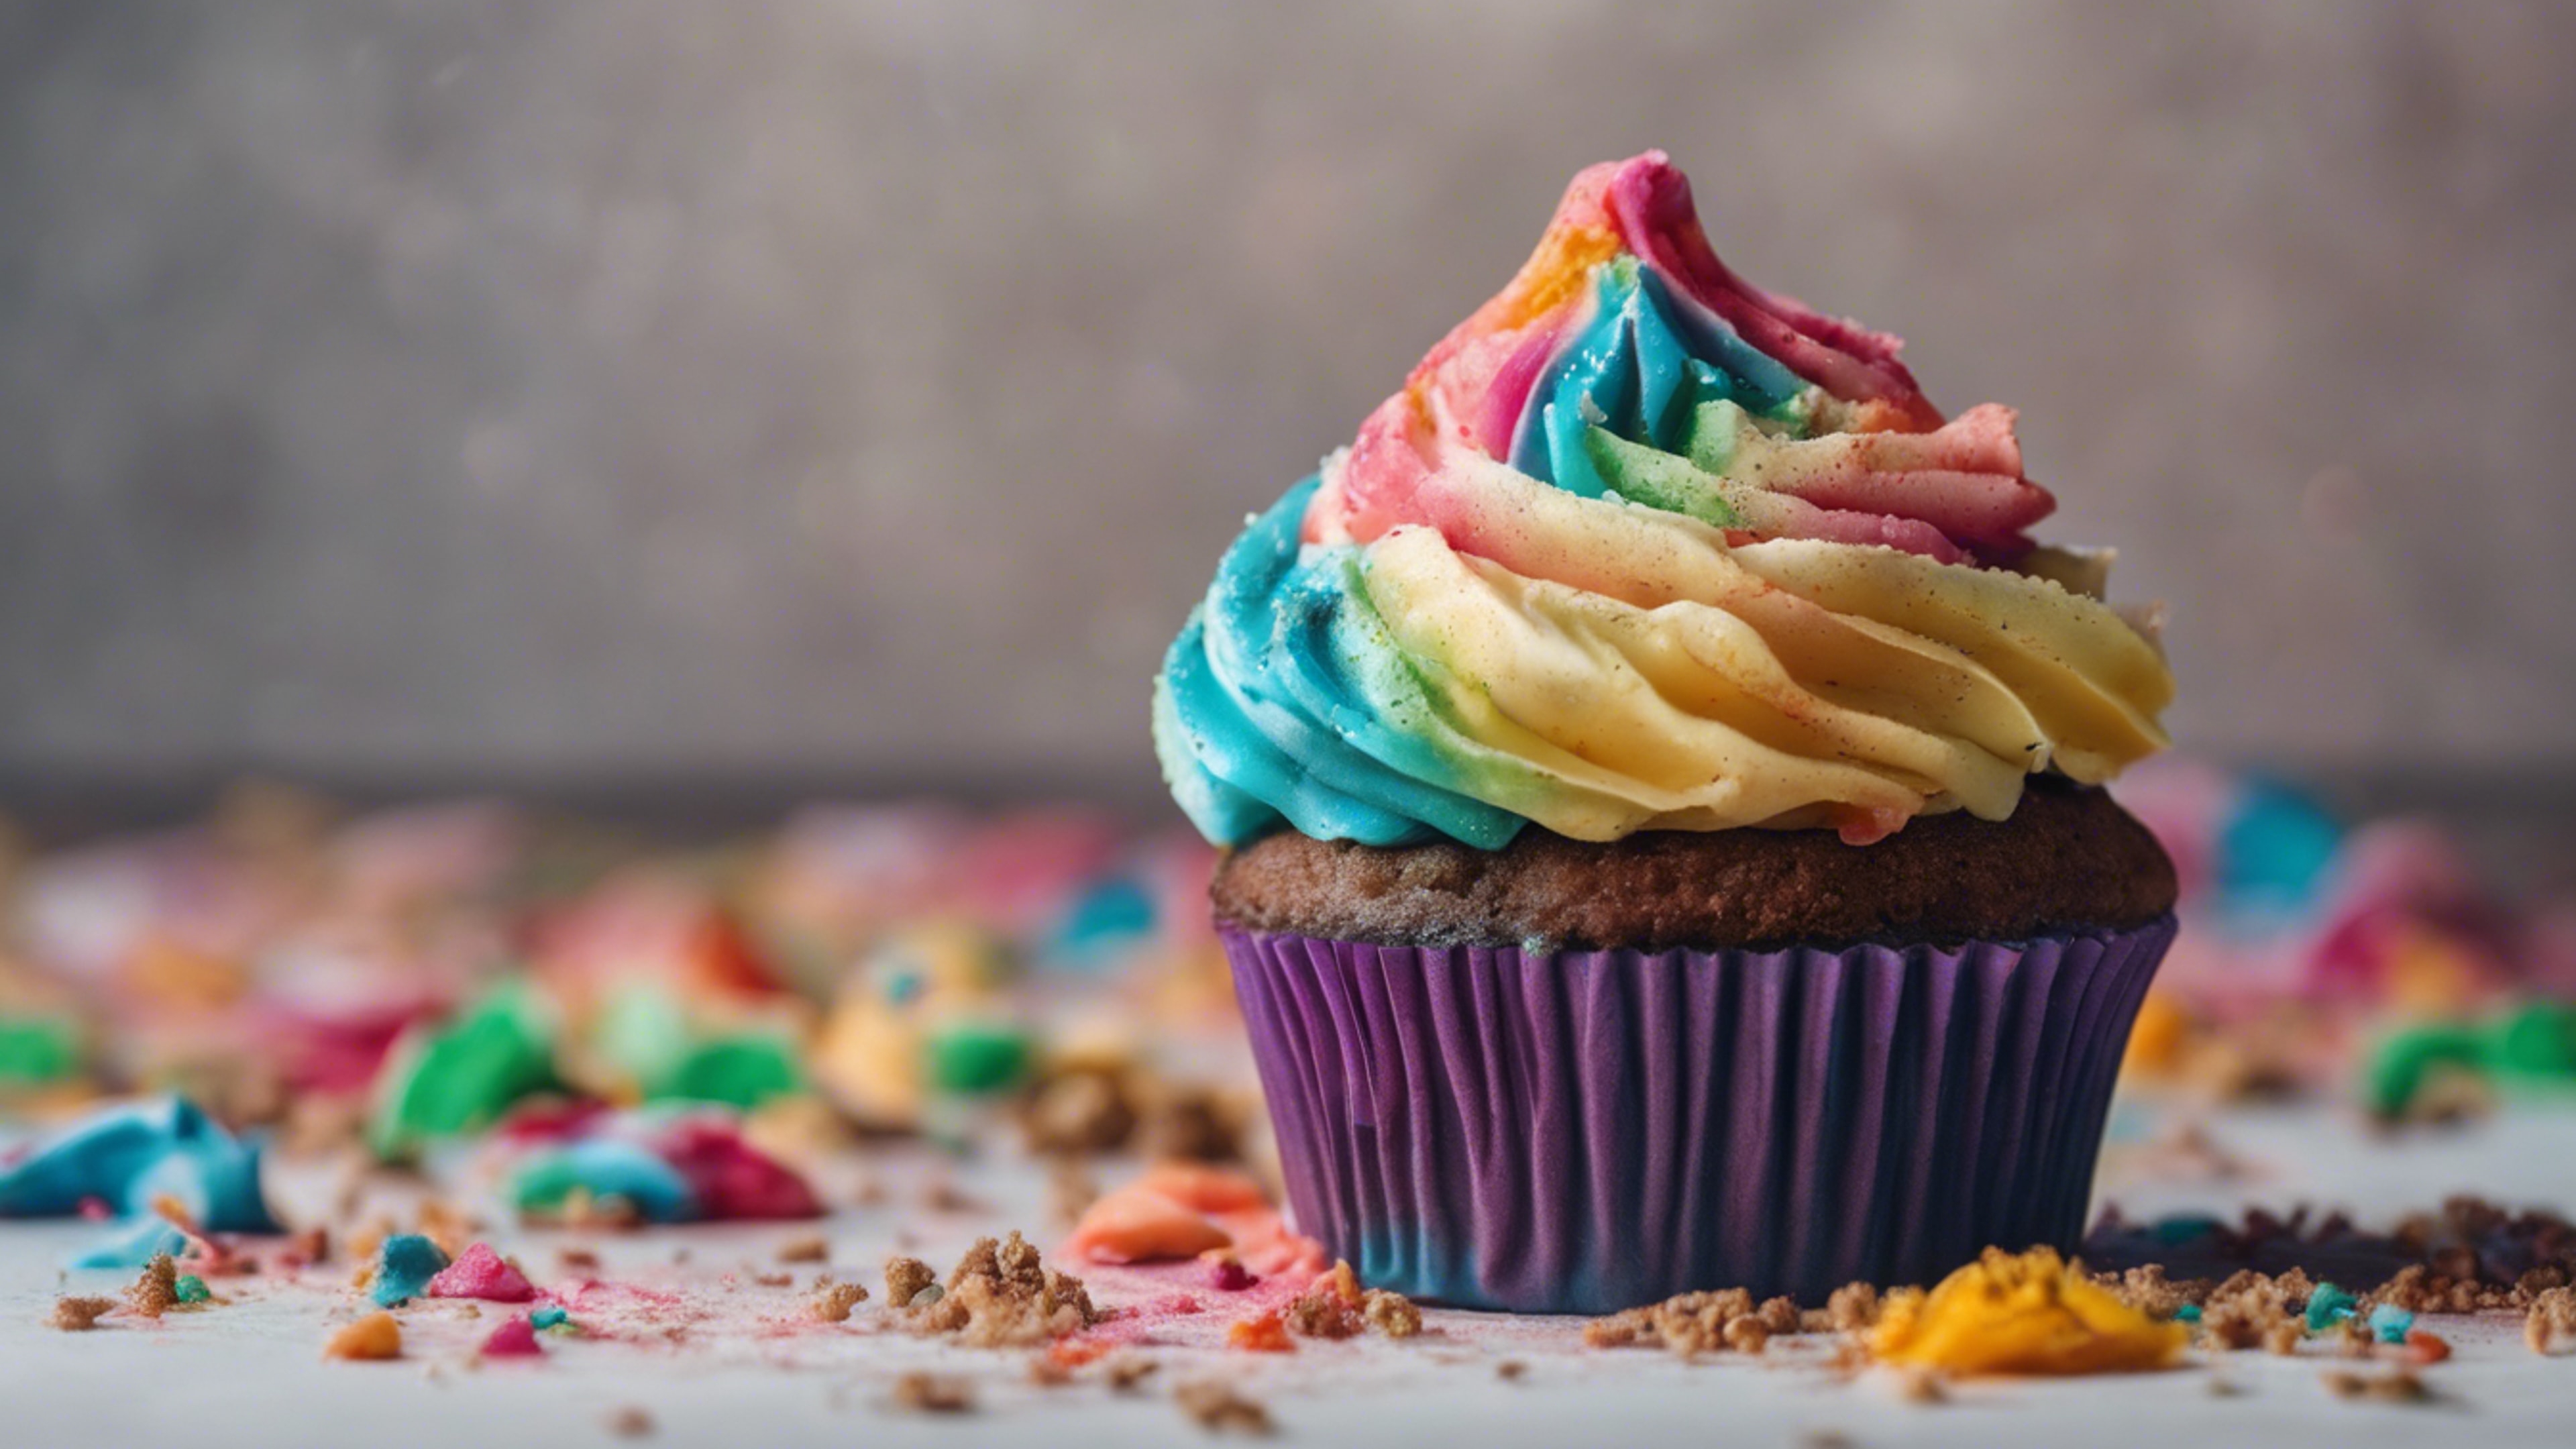 A half-eaten cupcake with rainbow frosting on a napkin, crumbs scattered around. Wallpaper[ecd9595879df4c40b18a]